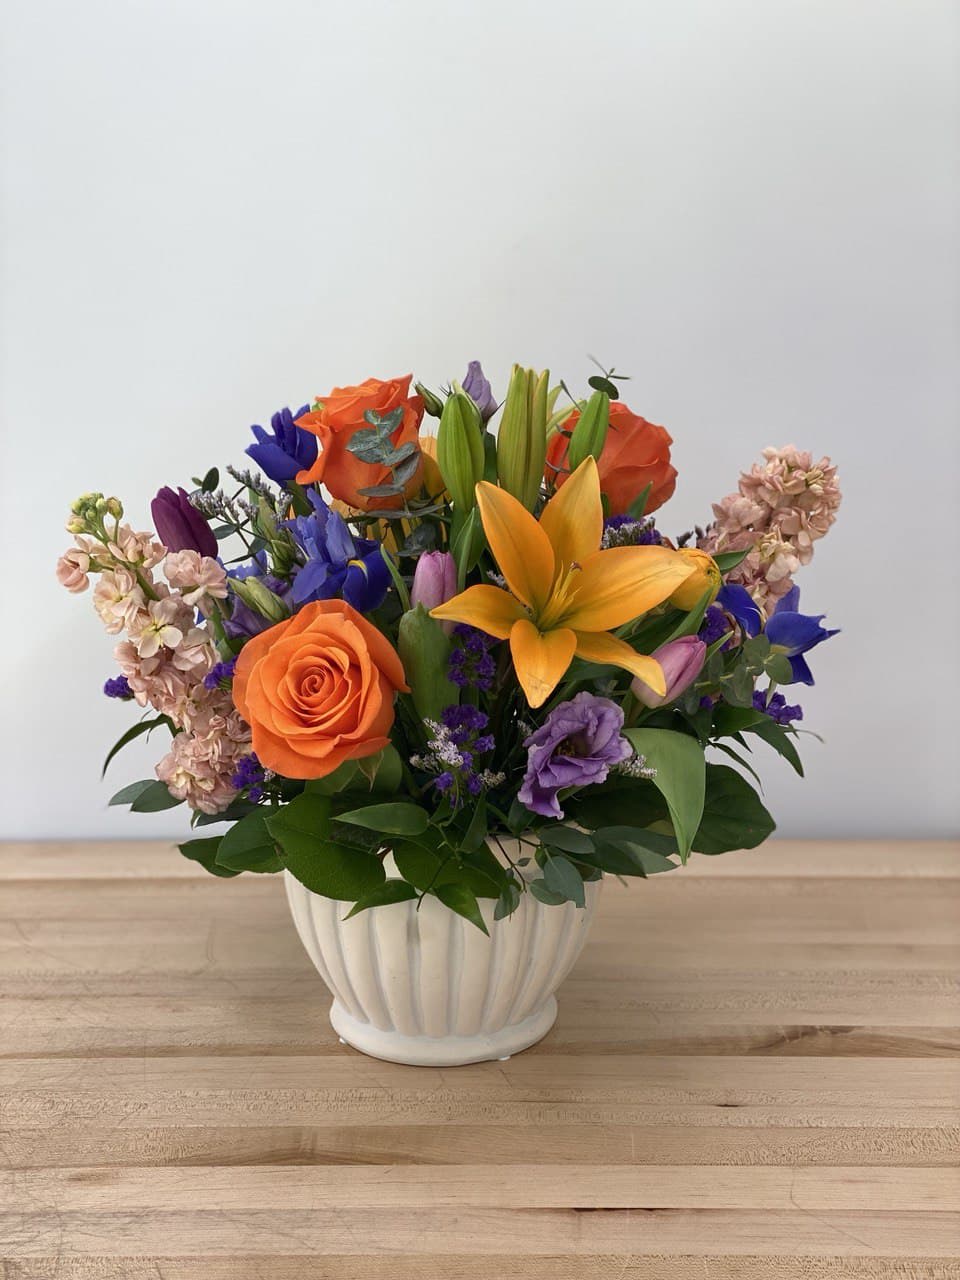 An extraordinary combination of complementary purple and orange, including lilies, iris, lisianthus